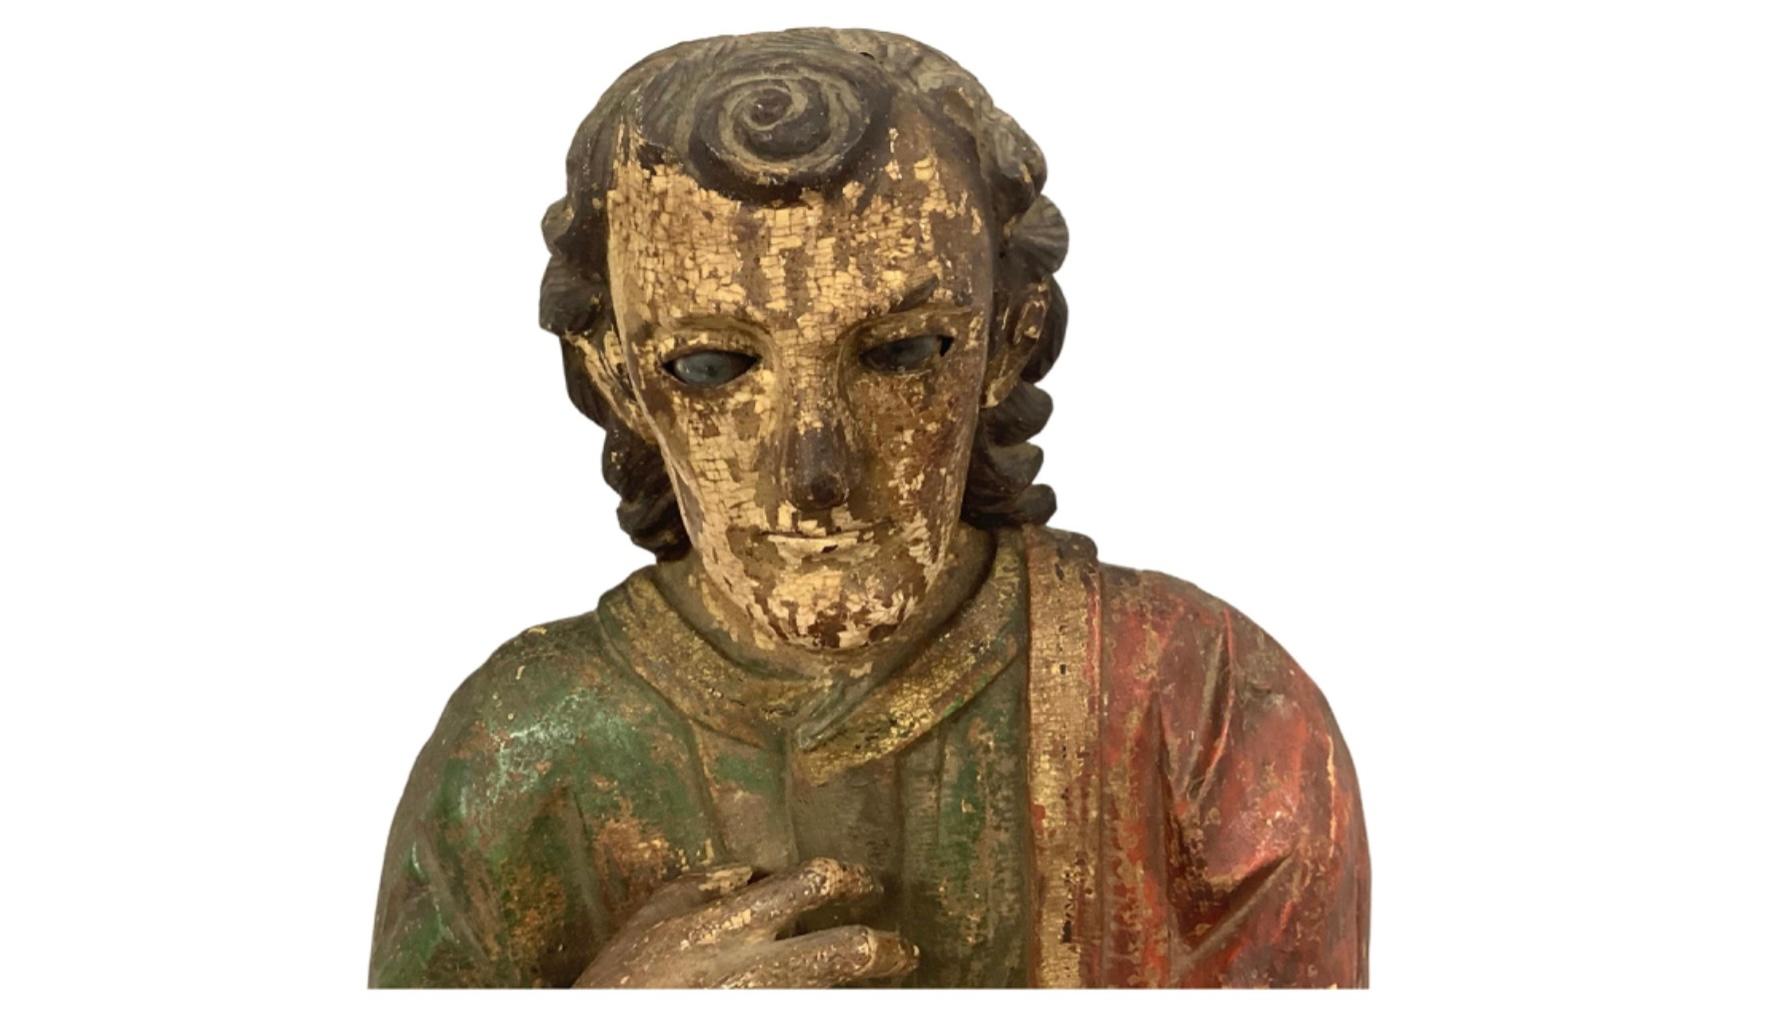 18th Century Carved & Polychrome Bust of a Saint with Glass Eye. Either Italian or Spanish. This piece retains a good portion of the original painted finish with age-appropriate wear and wonderful old patina.